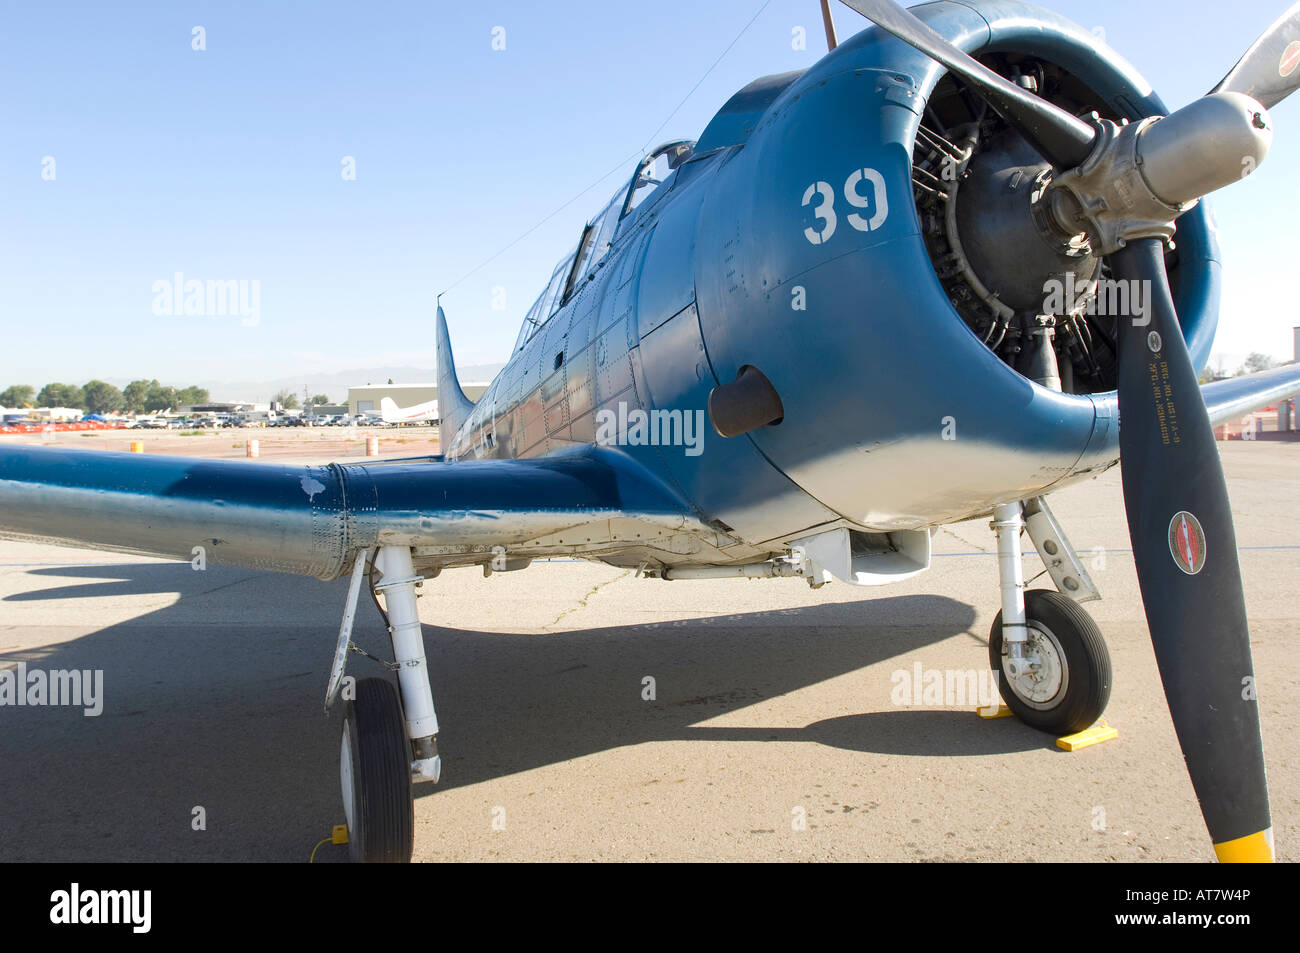 Blue vintage aircraft parked on the ramp. Combat Aircraft of the Pacific War. Douglas SBD/A-24 Dauntless/Banshee. Stock Photo